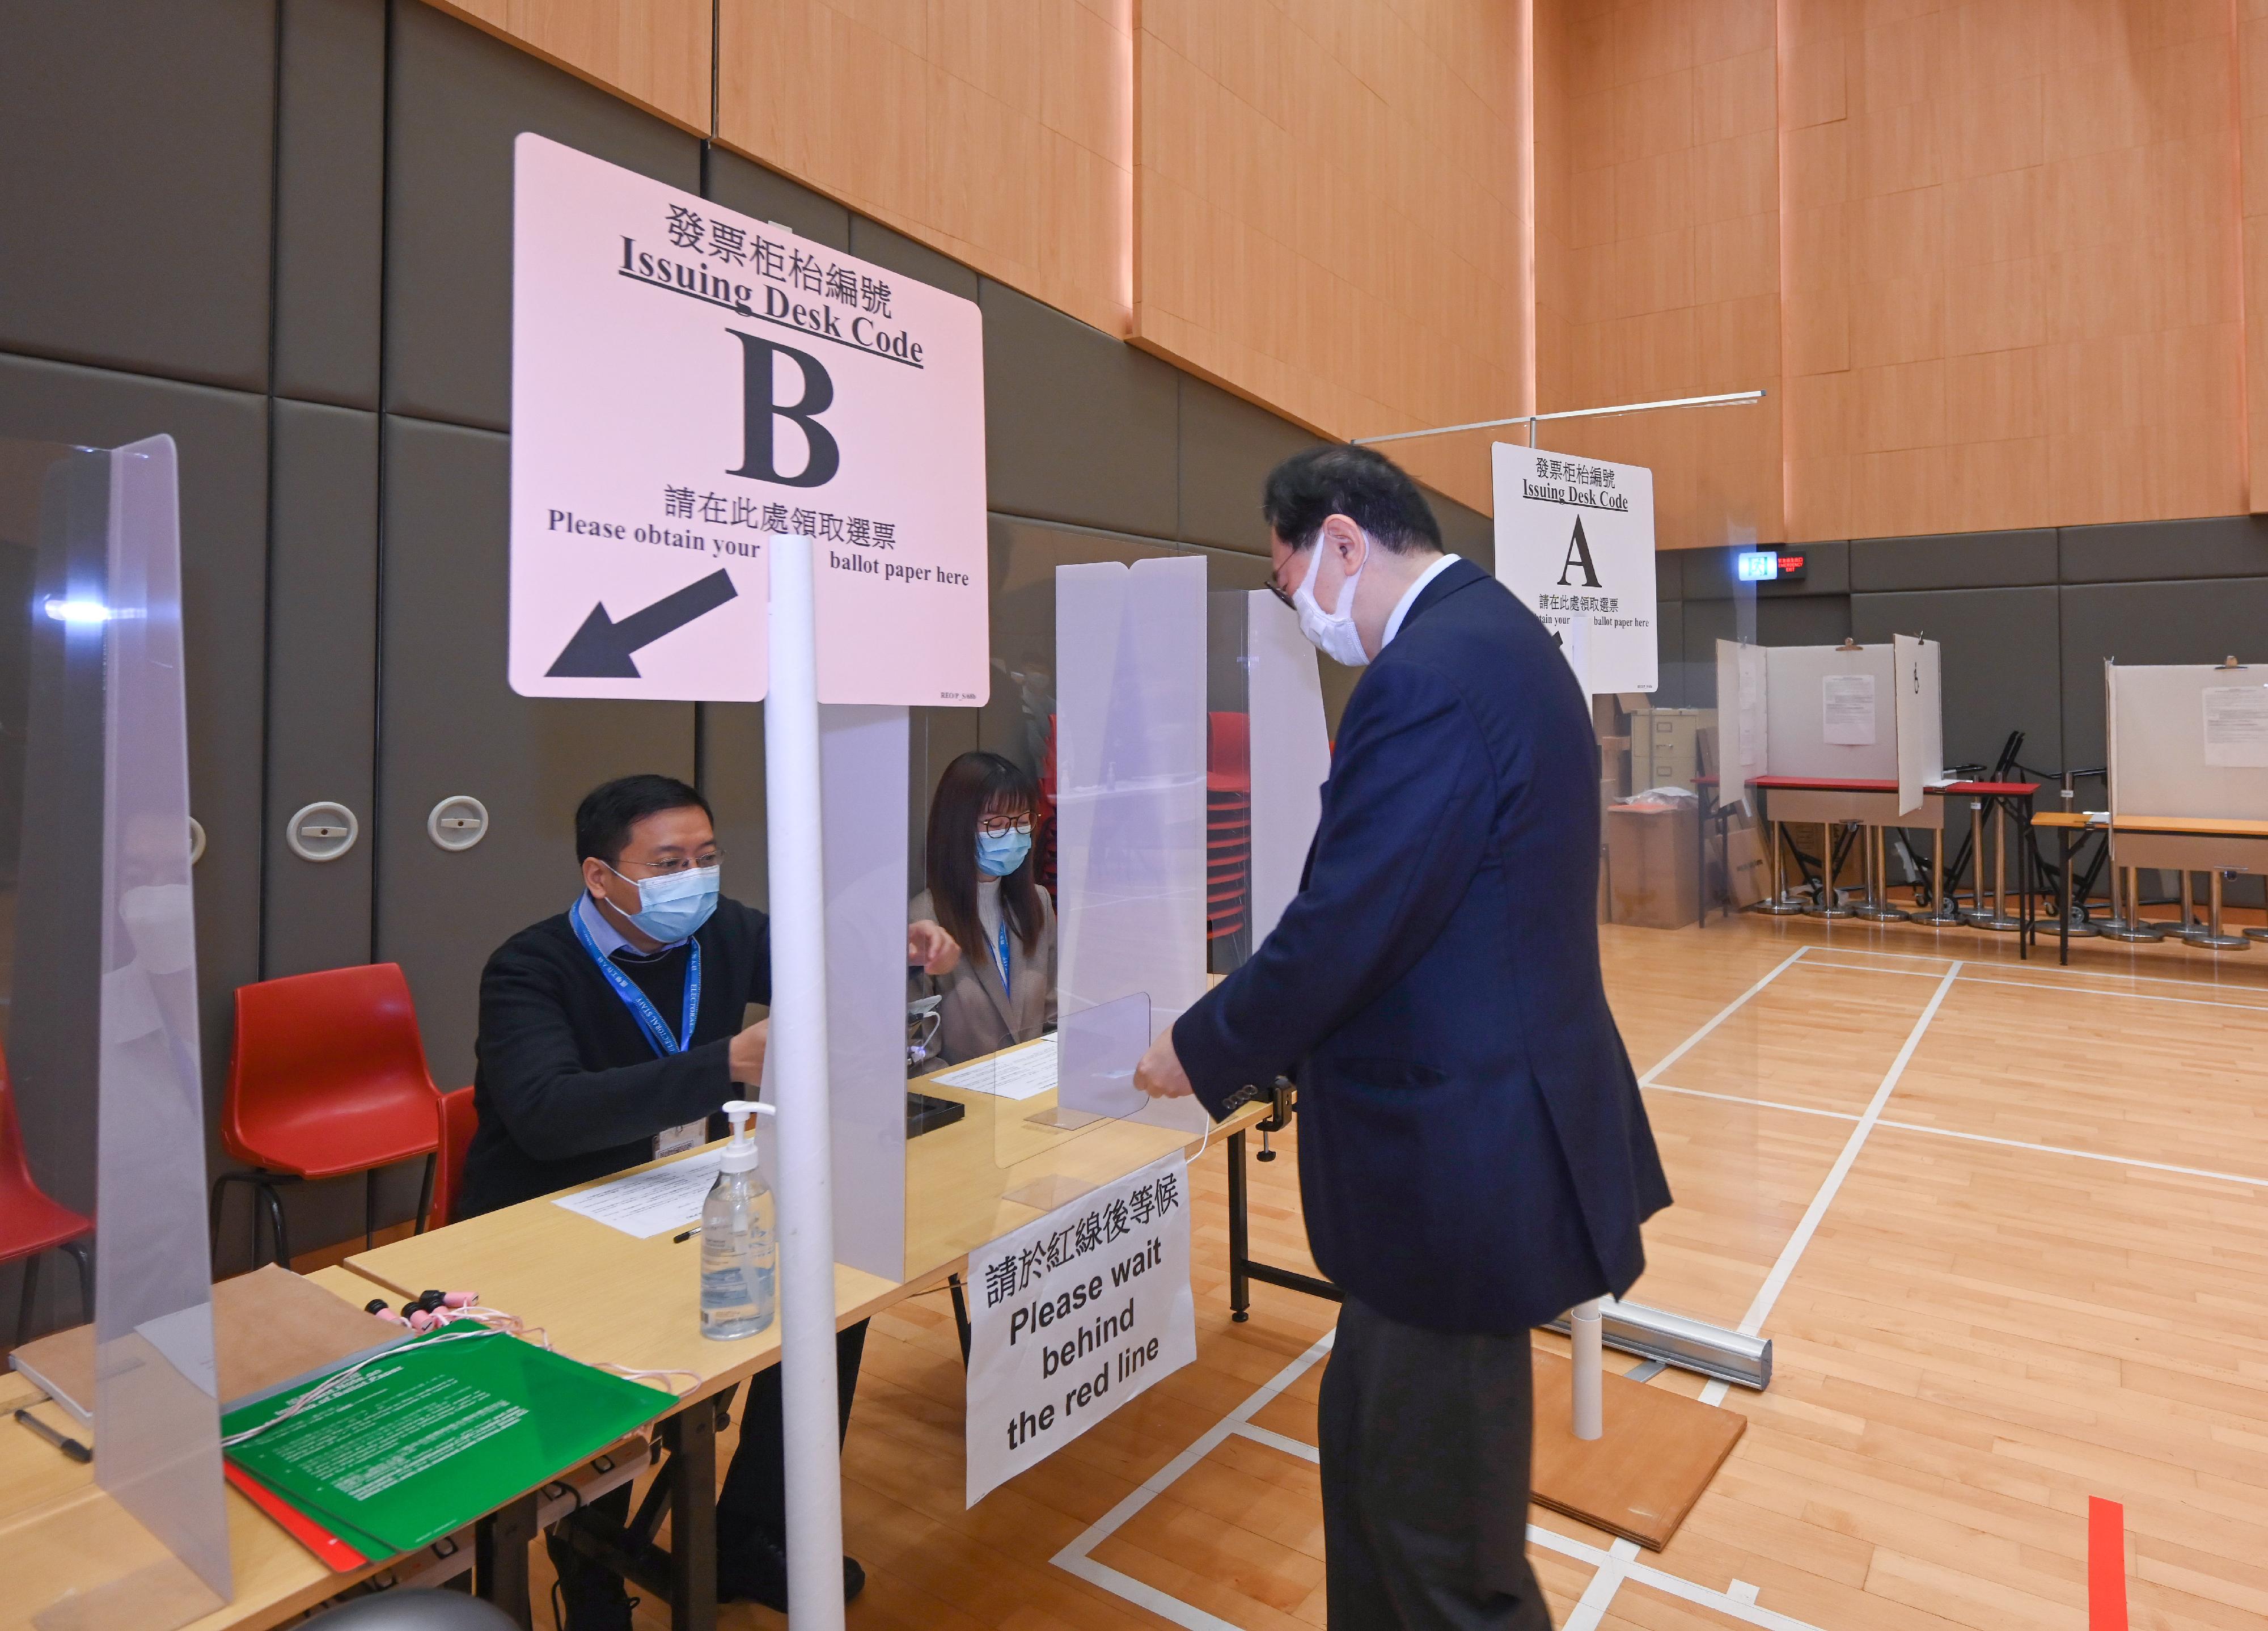 The Chairman of the Electoral Affairs Commission, Mr Justice Barnabas Fung Wah (first right), demonstrates the proper procedure to cast votes in the Legislative Council General Election during his visit to a mock polling station at the North Point Community Hall today (December 14).